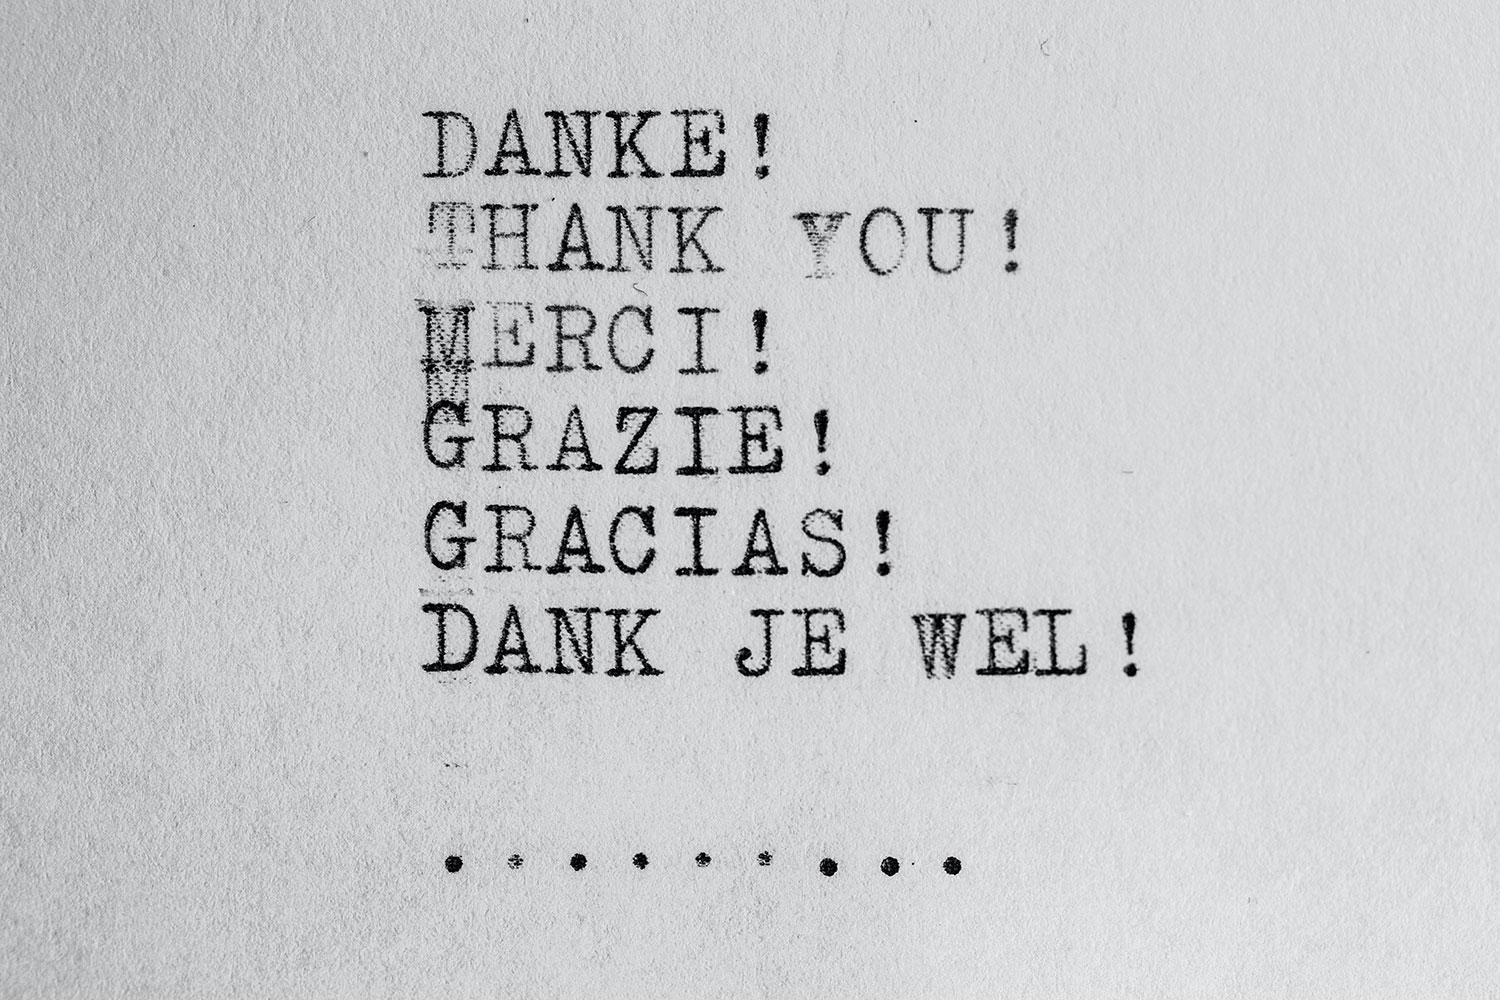 thank you in multiple languages by typewriter